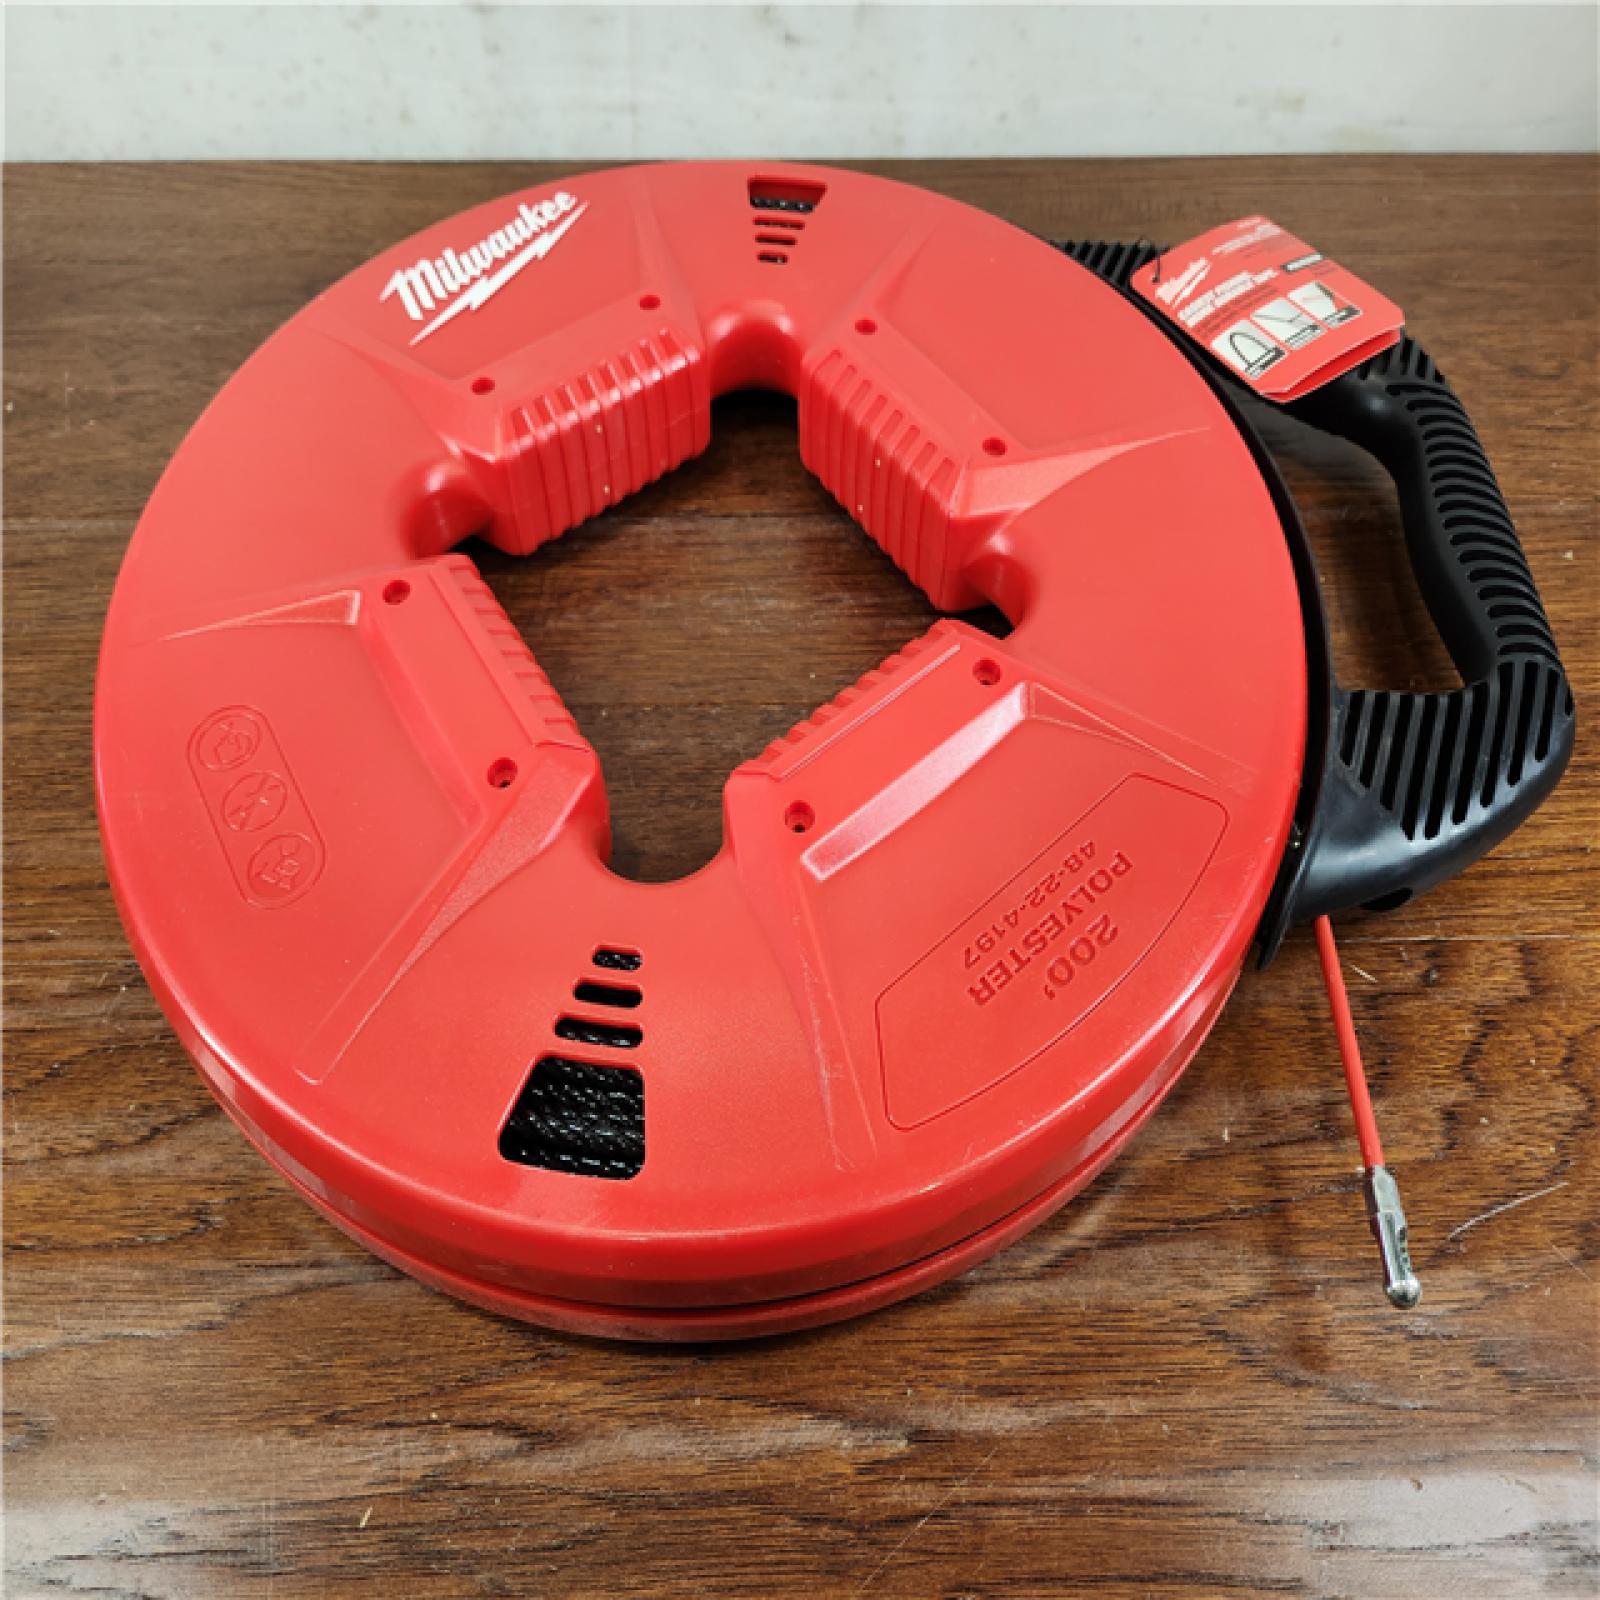 AS-IS Milwaukee 200 Ft. Polyester Fish Tape W/ Flexible Metal Leader (Tool Only)